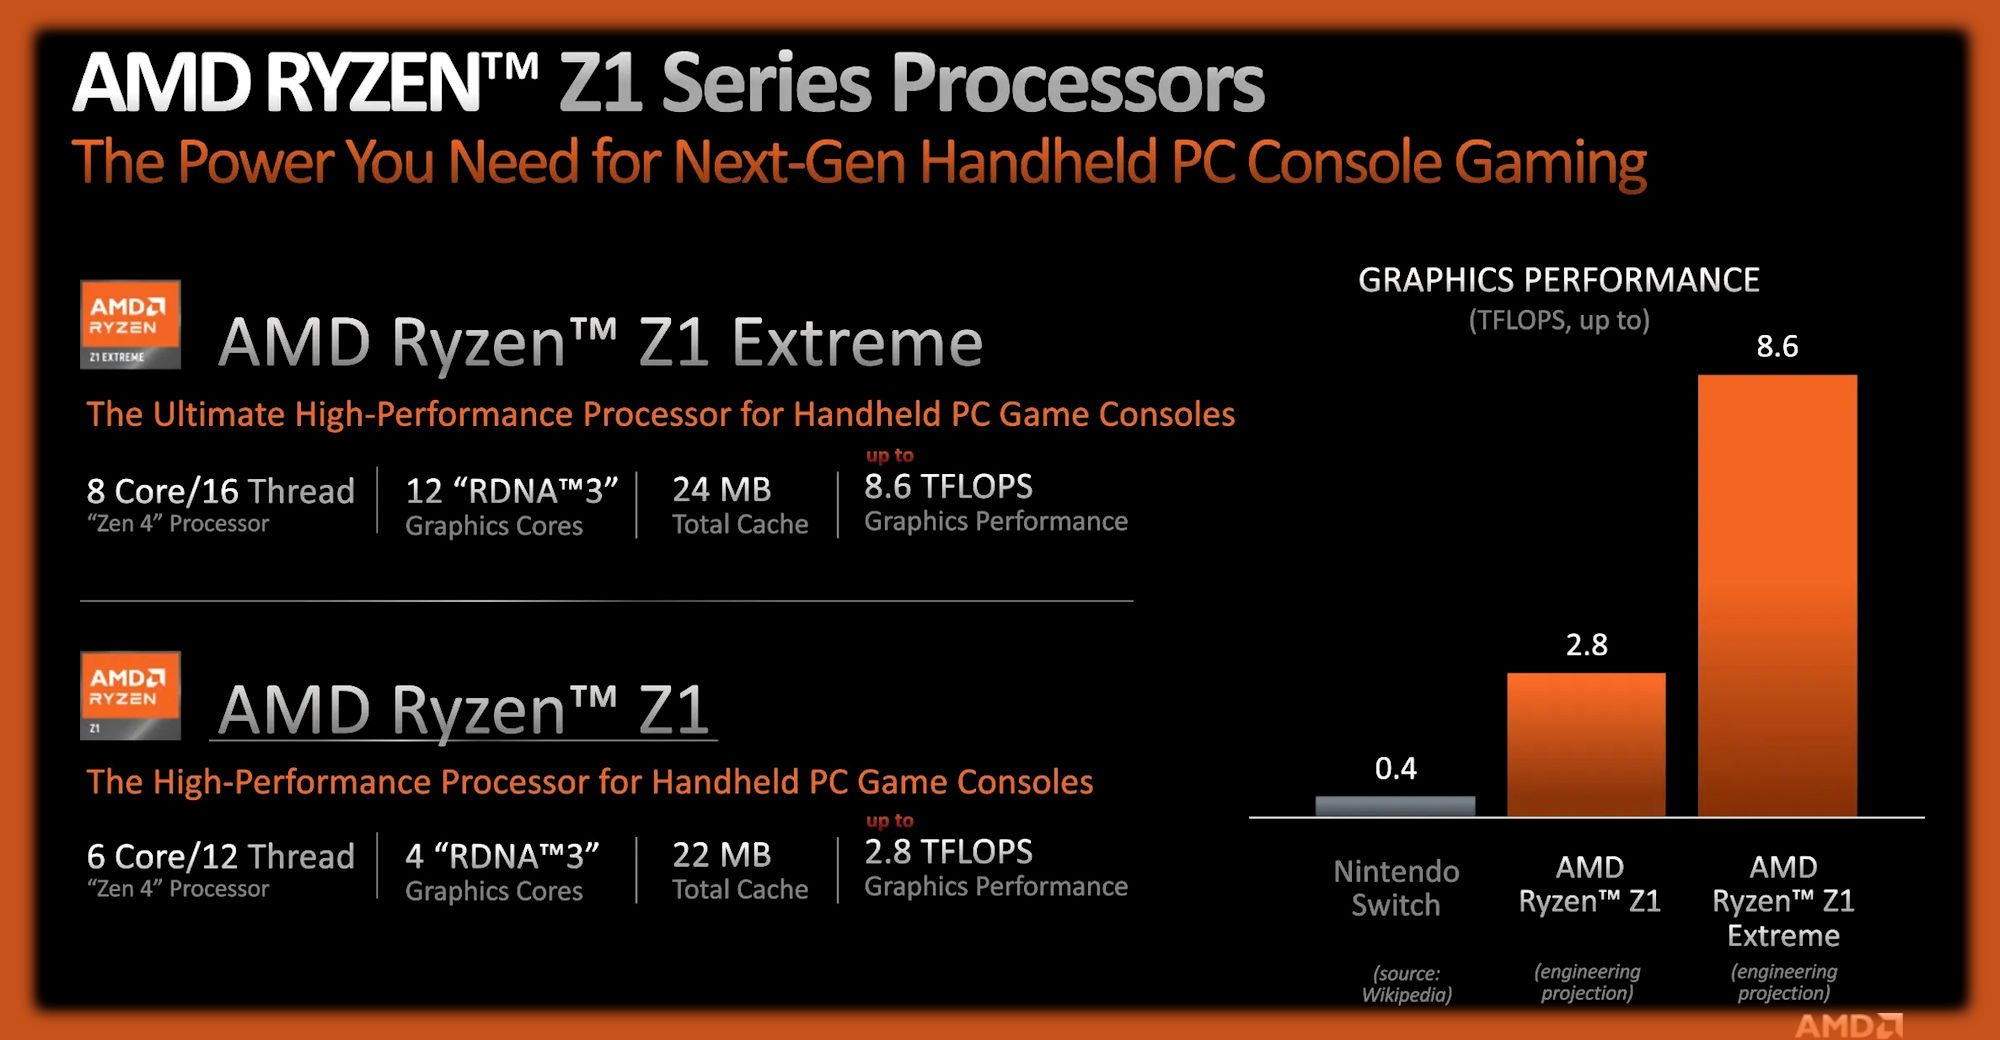 Info slides detailing the specs and performance details of the AMD Ryzen Z1 and Z1 Extreme processors.